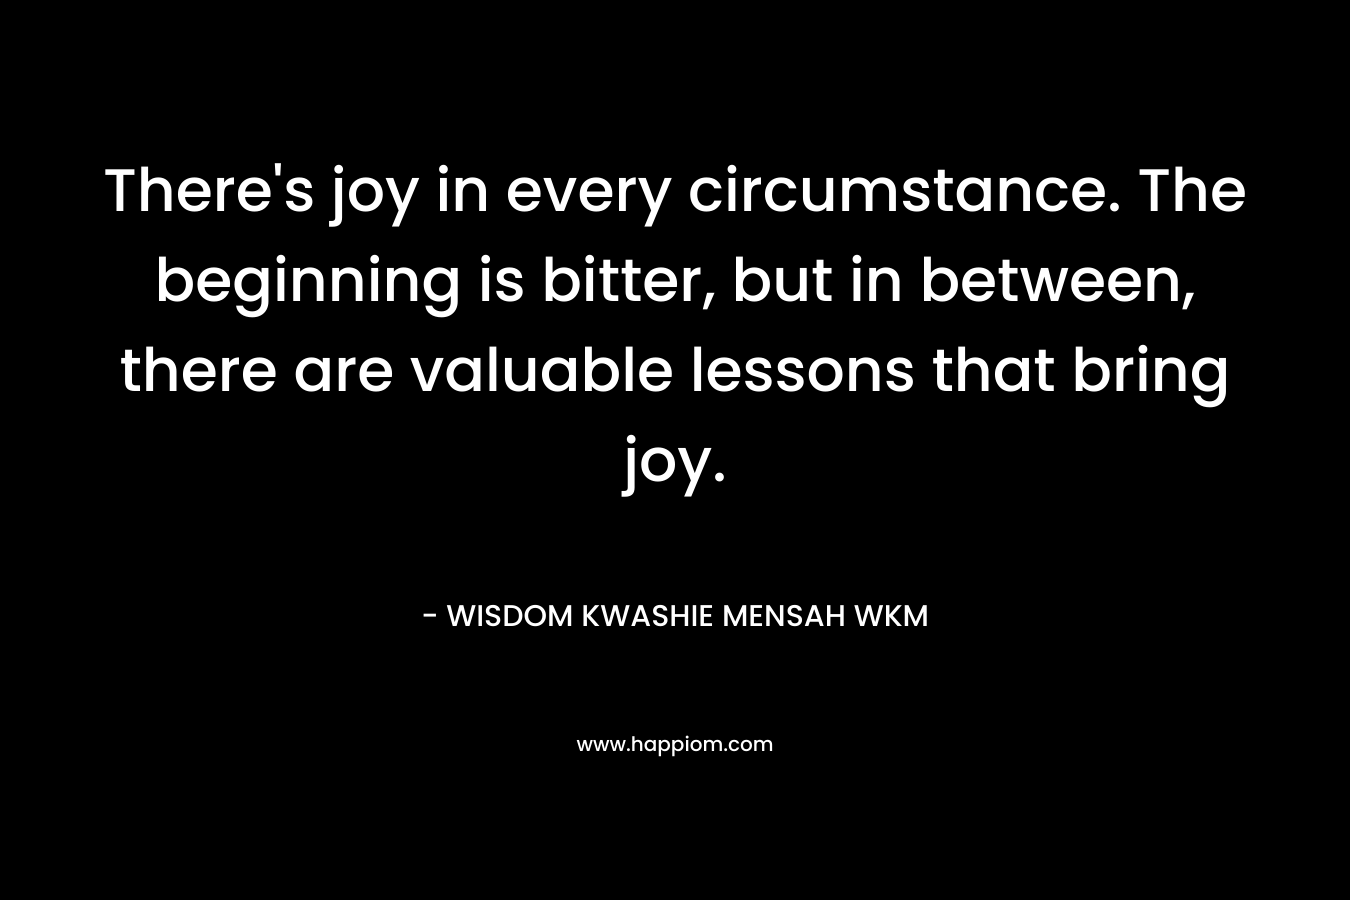 There's joy in every circumstance. The beginning is bitter, but in between, there are valuable lessons that bring joy.